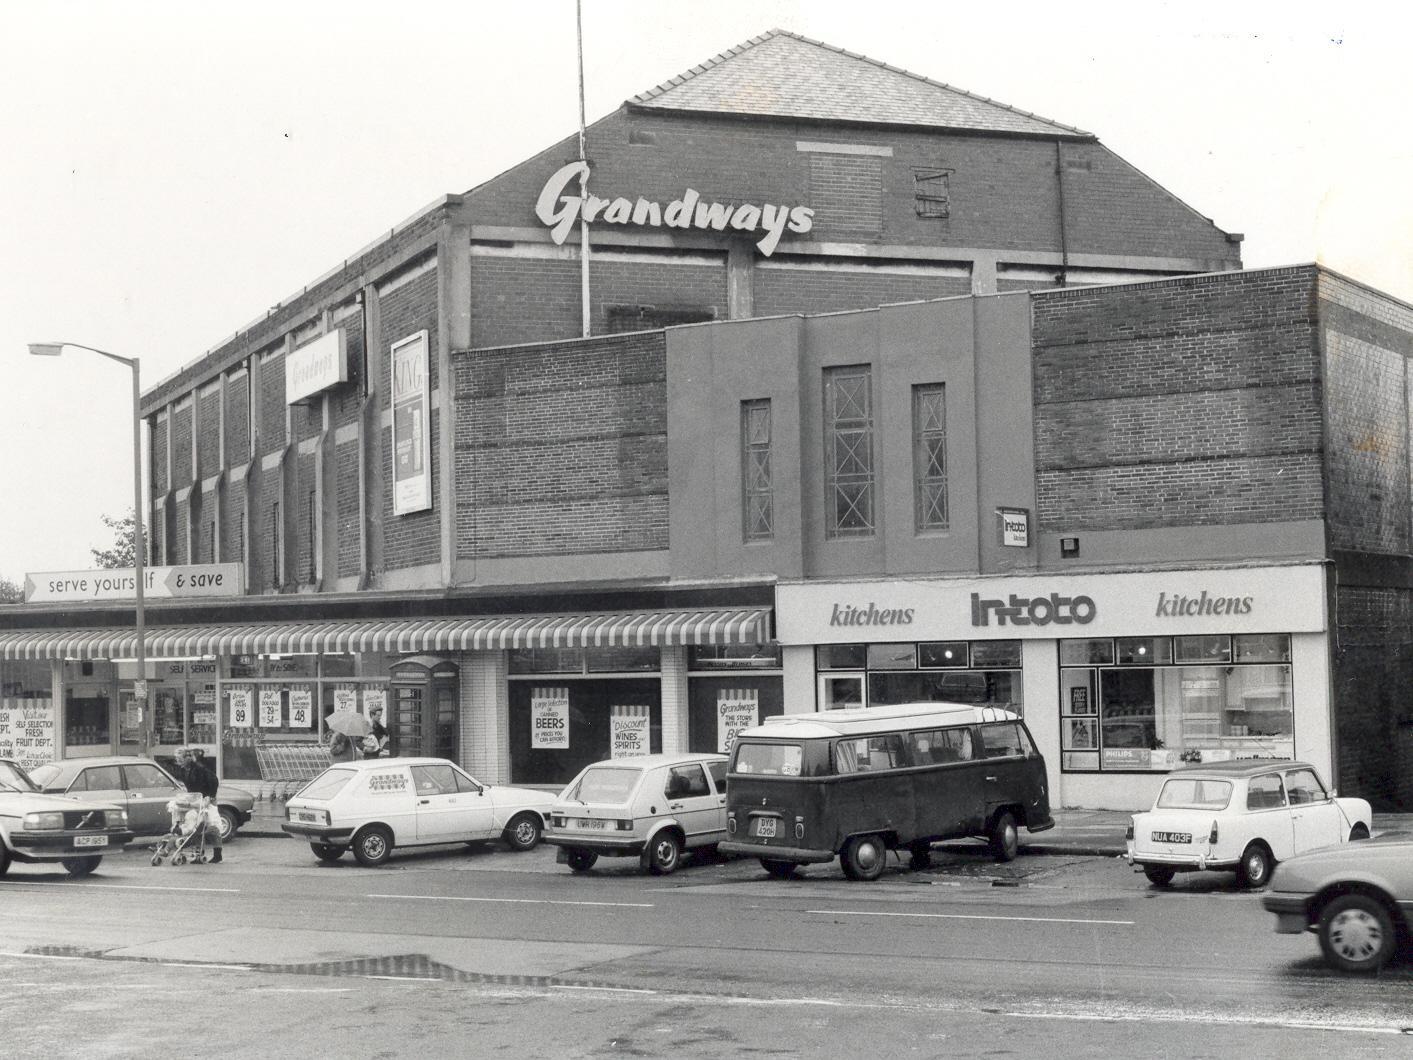 The former Glen Royal cinema is tucked away behind other businesses and is itself a supermarket.